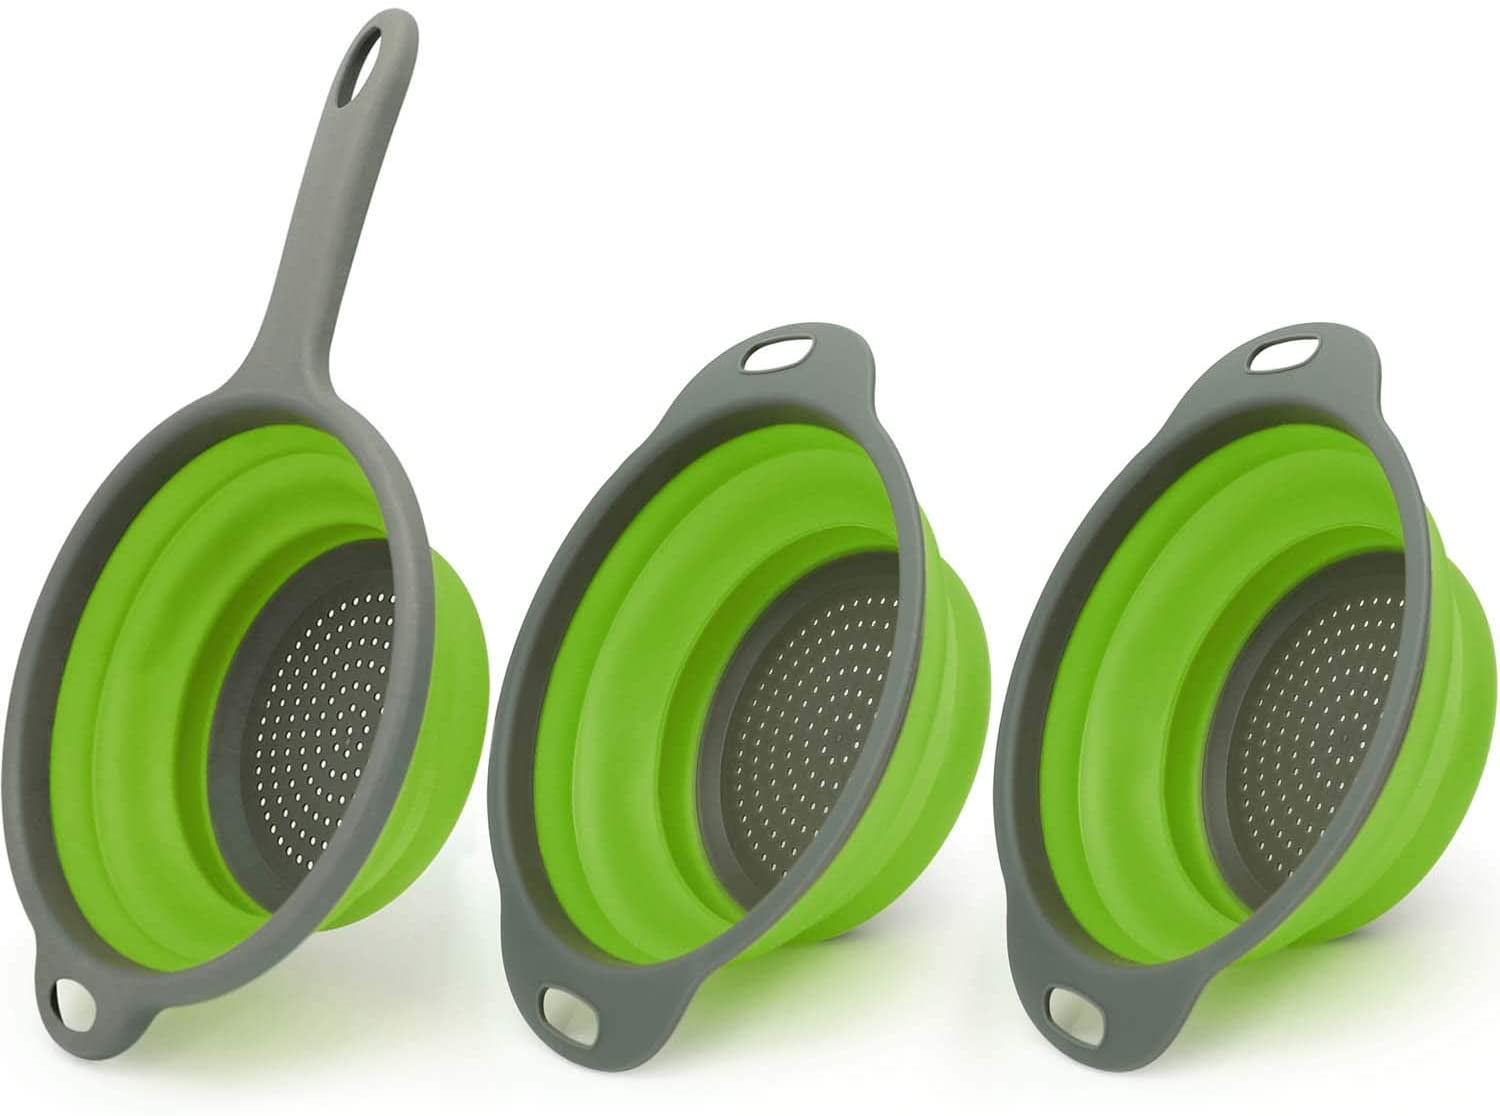 easy to clean and suitable for the dishwasher space saving grey Foldable silicone strainer by Coolinato® Set of 3 